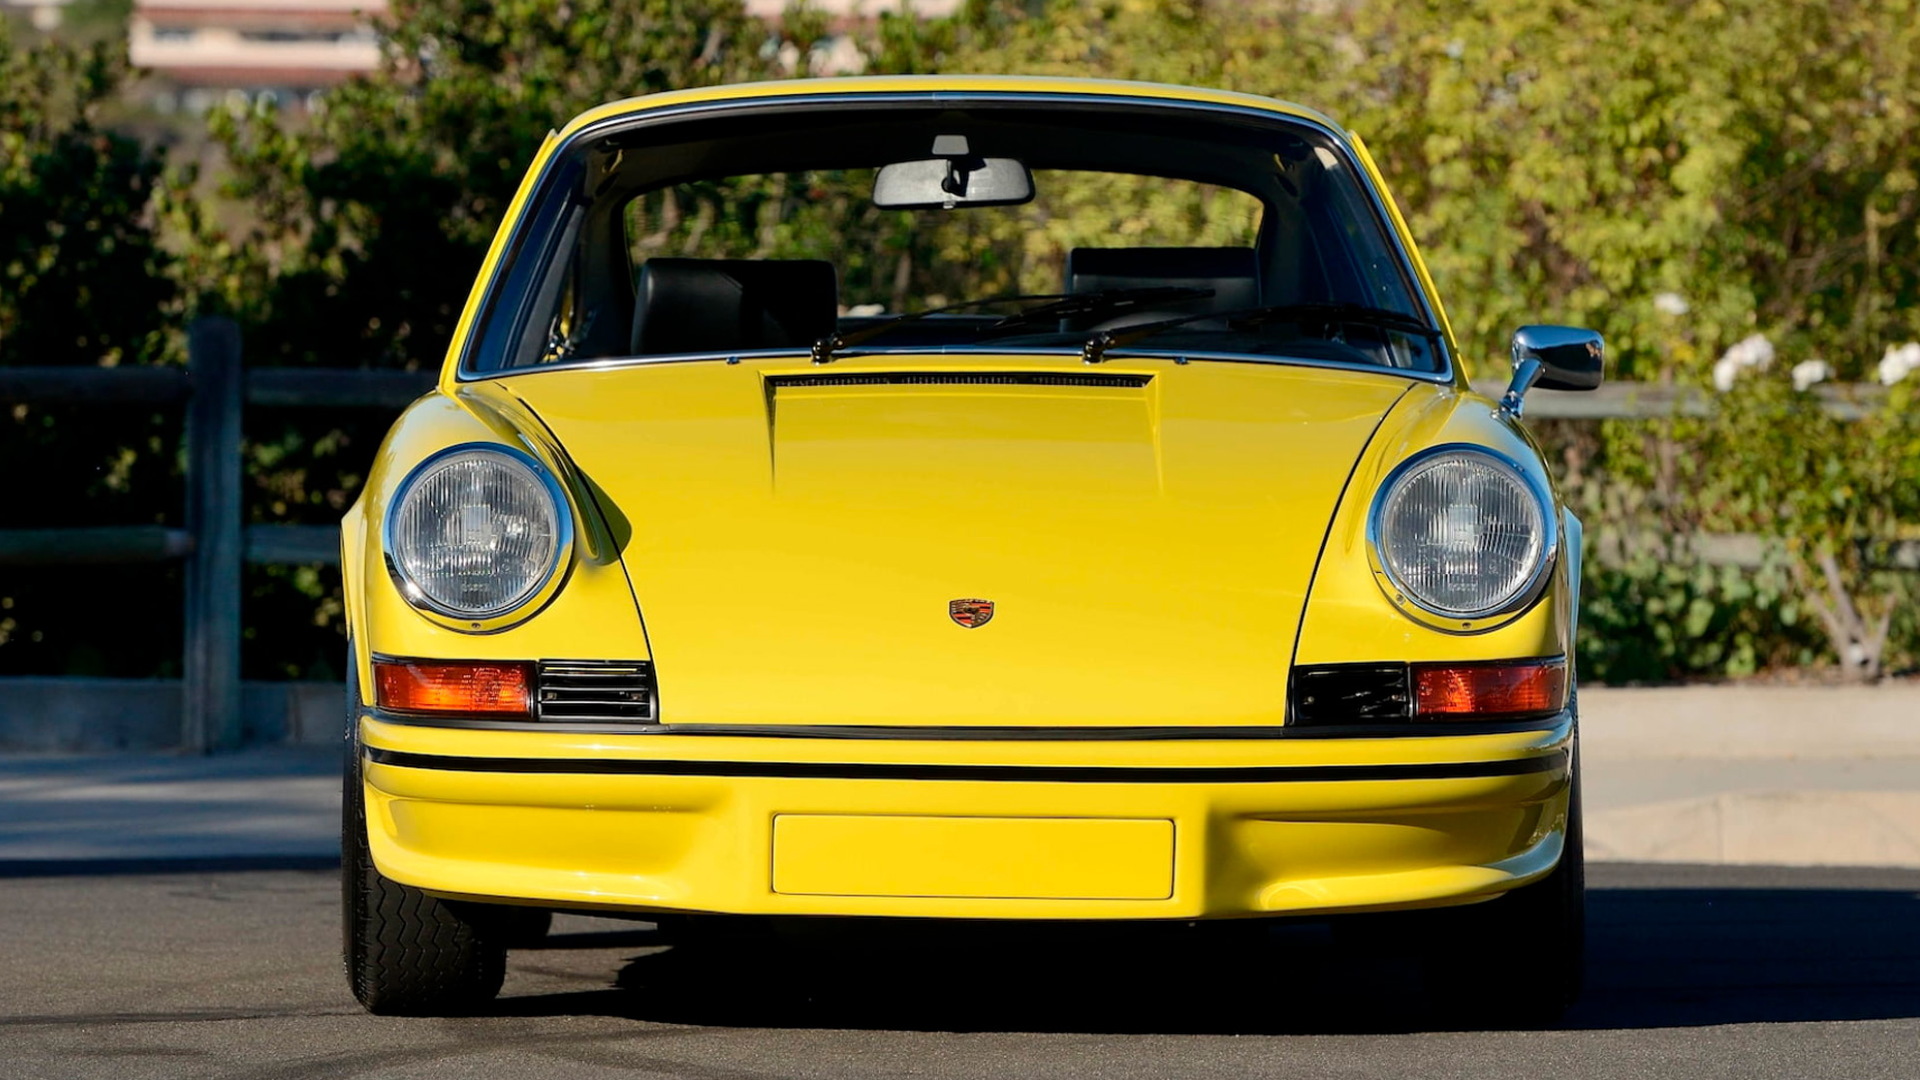 1973 Porsche 911 Carrera RS 2.7 once owned by Paul Walker - Photo credit: Mecum